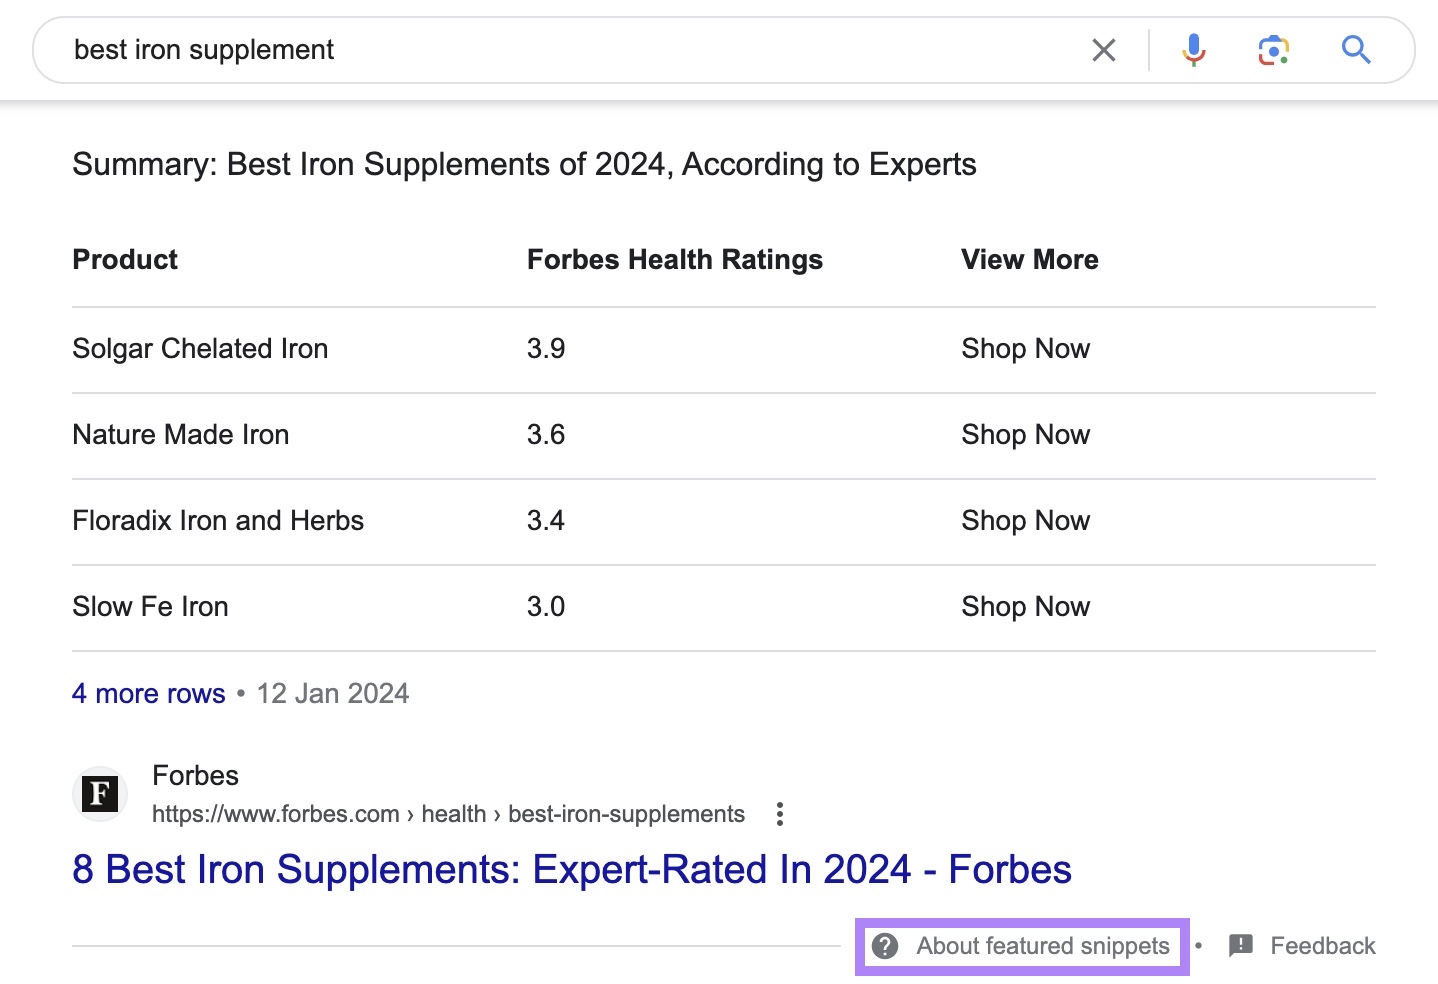 A featured snippet showing for "best iron supplement" query